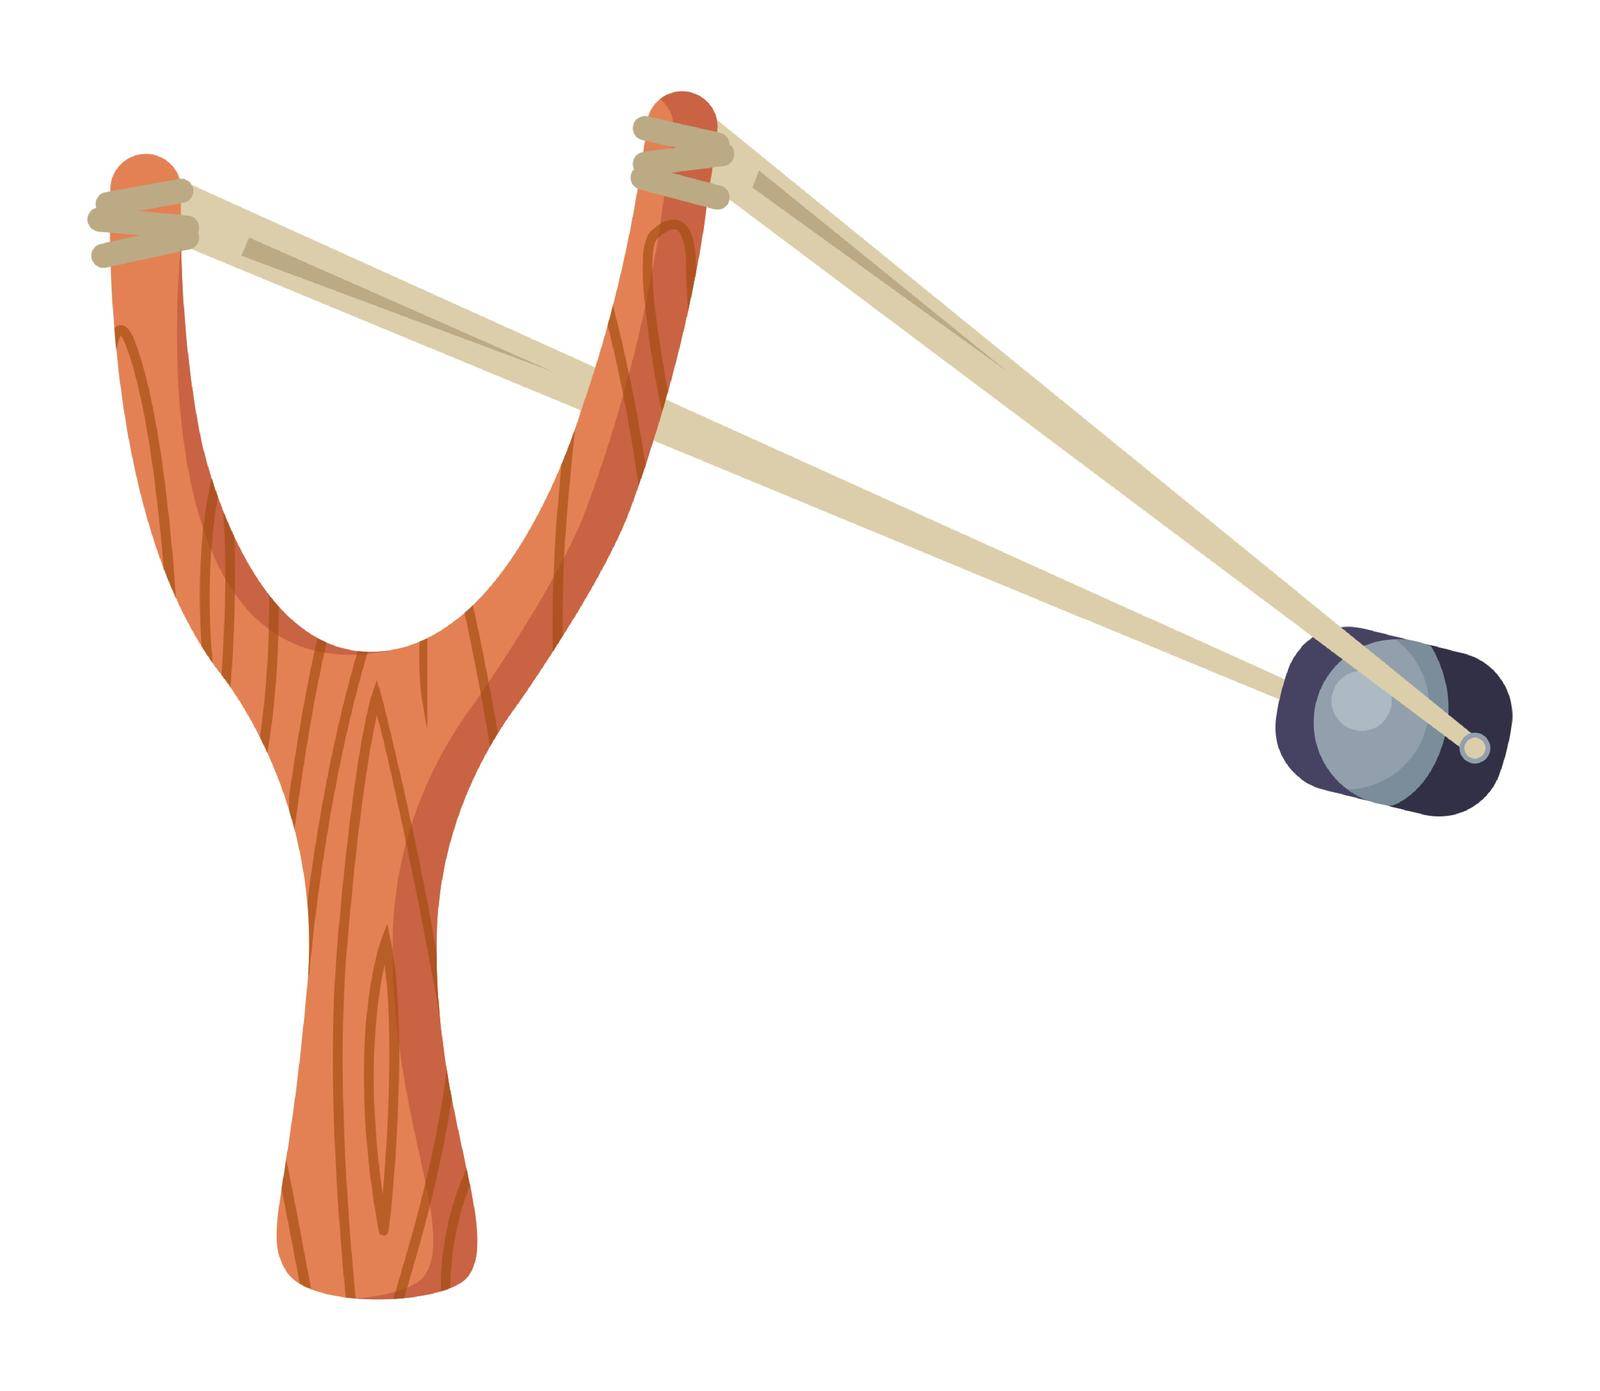 a wooden slingshot shoots a stone. children toy. by PlutusART